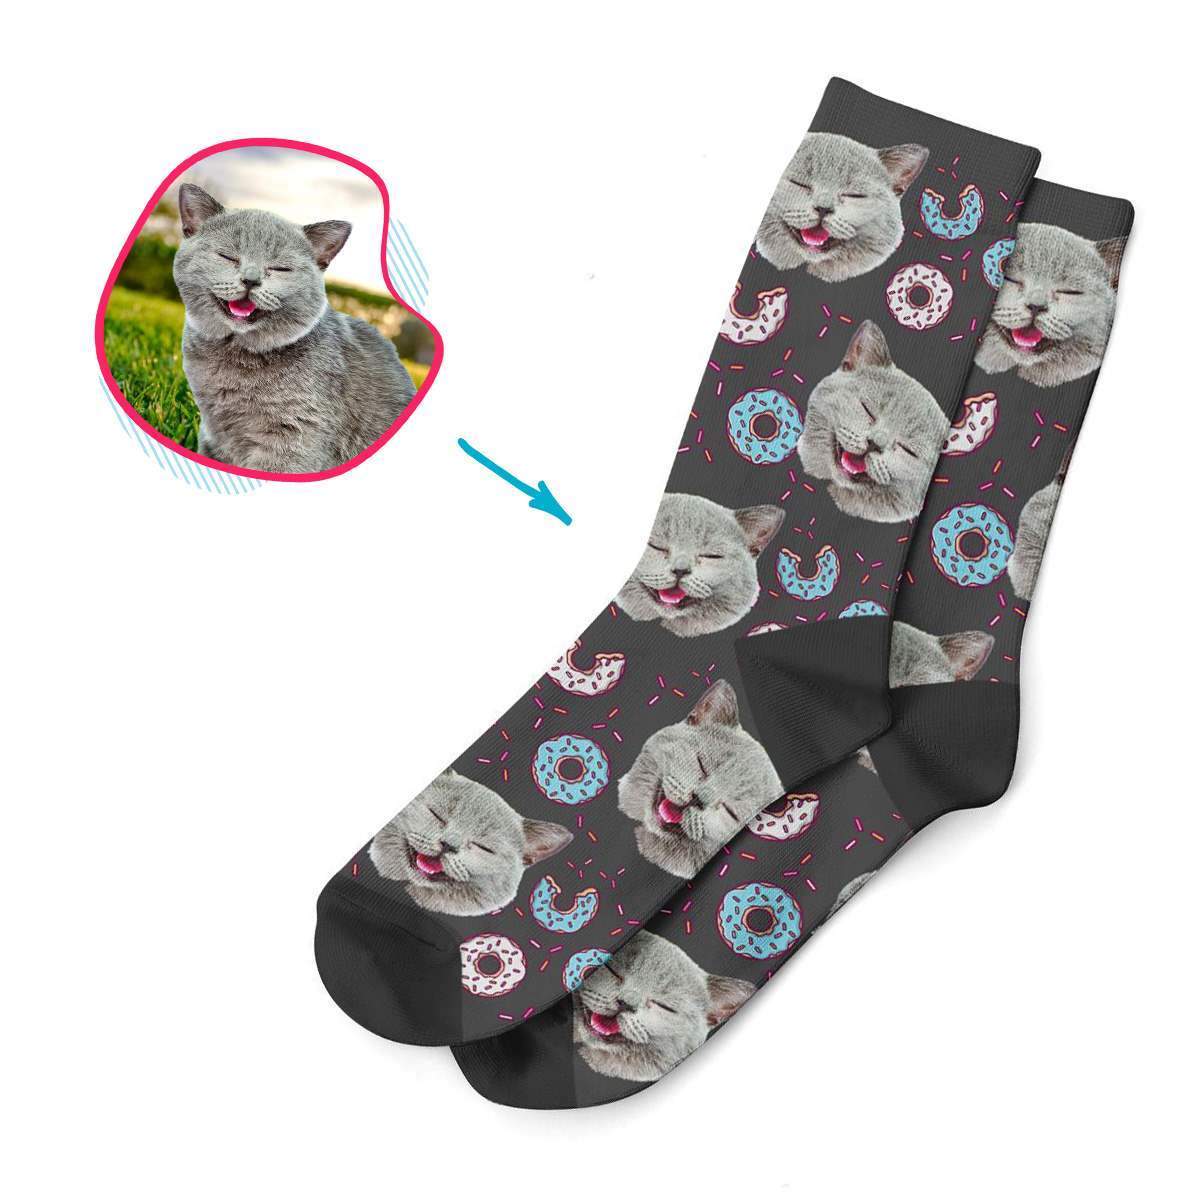 dark Donuts socks personalized with photo of face printed on them